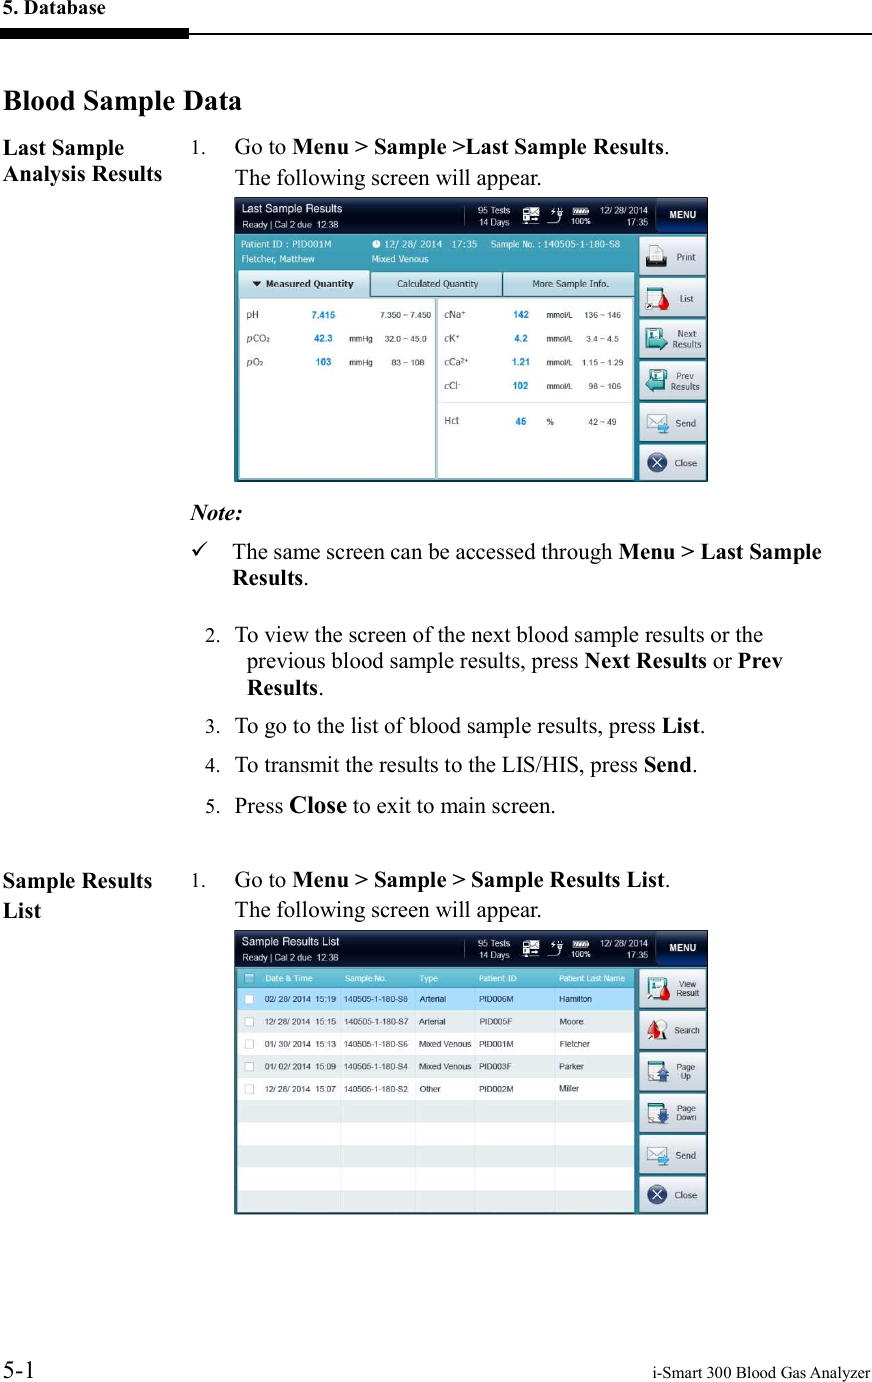 5. Database     5-1    i-Smart 300 Blood Gas Analyzer  Blood Sample DataLast Sample Analysis Results  1. Go to Menu &gt; Sample &gt;Last Sample Results.     The following screen will appear.  Note:  The same screen can be accessed through Menu &gt; Last Sample Results.   2. To view the screen of the next blood sample results or the previous blood sample results, press Next Results or Prev Results. 3. To go to the list of blood sample results, press List. 4. To transmit the results to the LIS/HIS, press Send. 5. Press Close to exit to main screen.  Sample Results List  1. Go to Menu &gt; Sample &gt; Sample Results List.     The following screen will appear.    